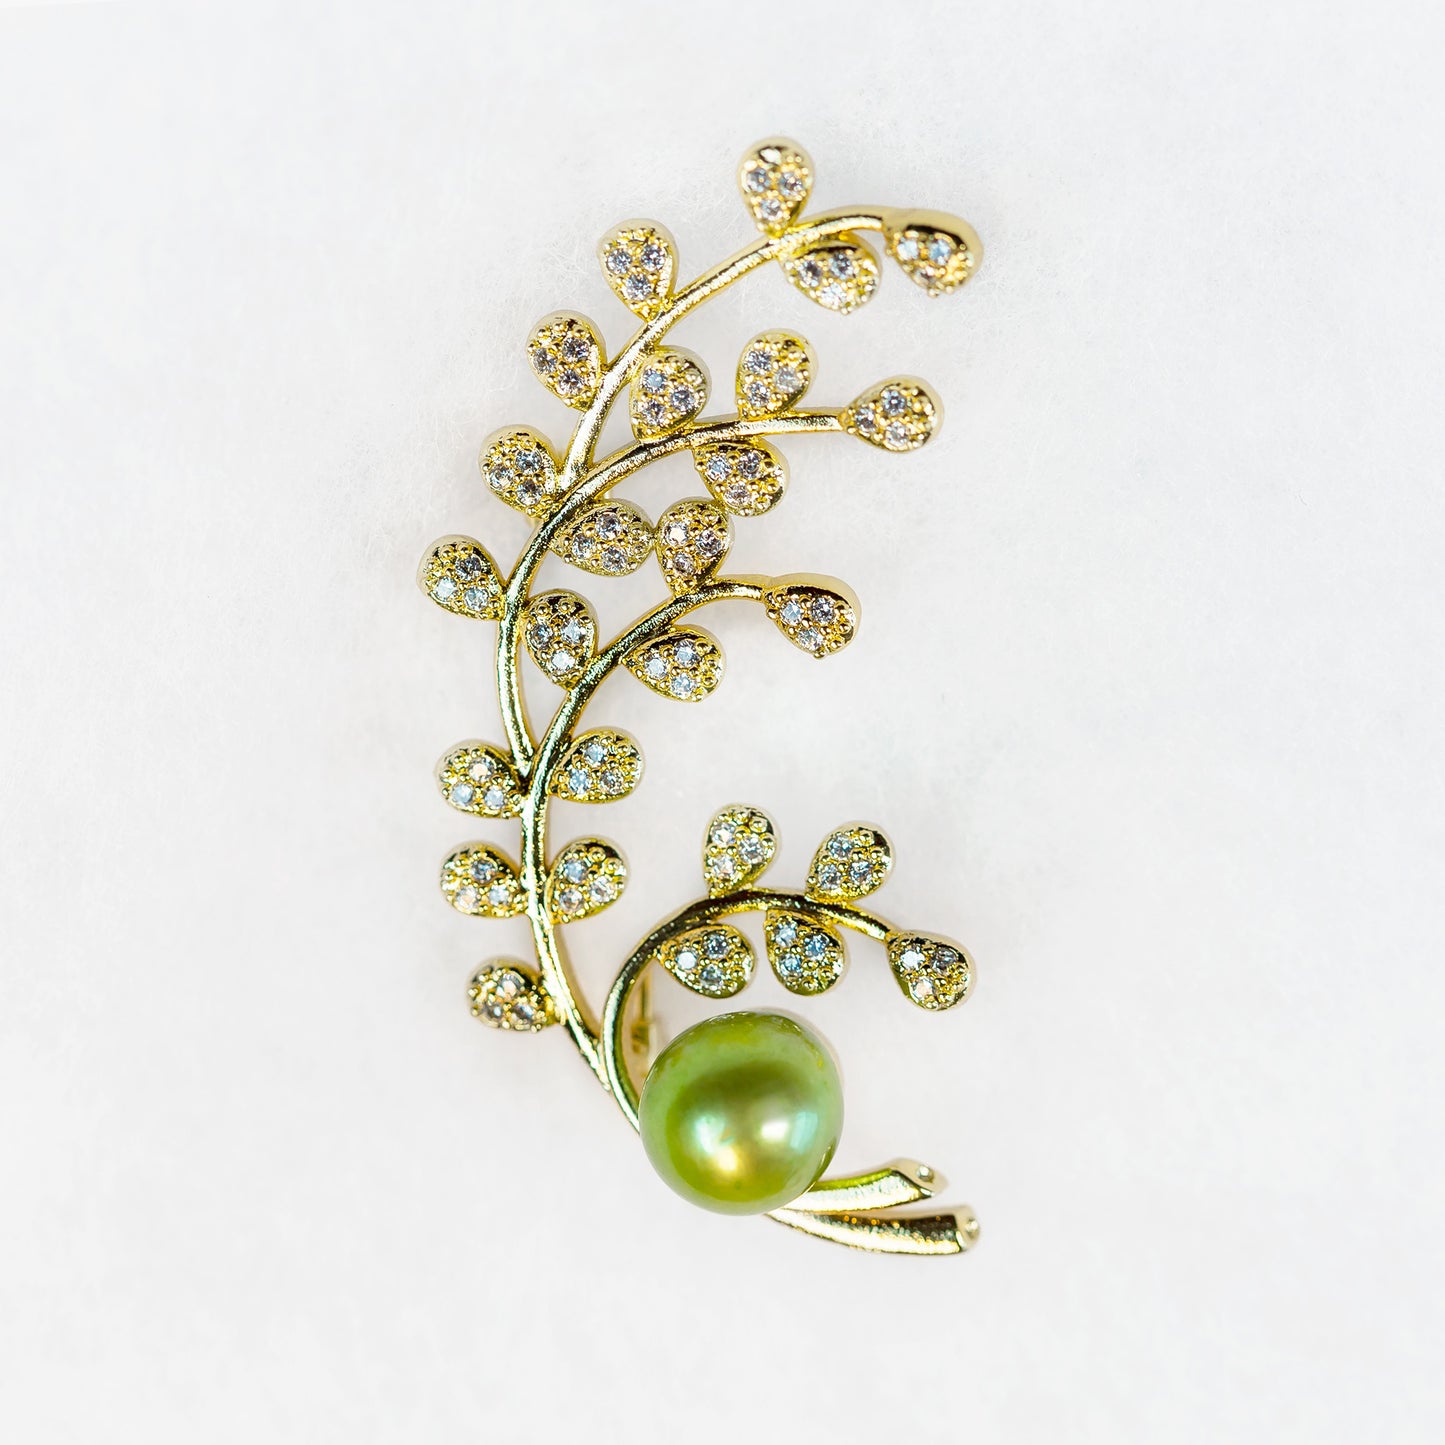 Gold Plated Cherry Blossom Brooch